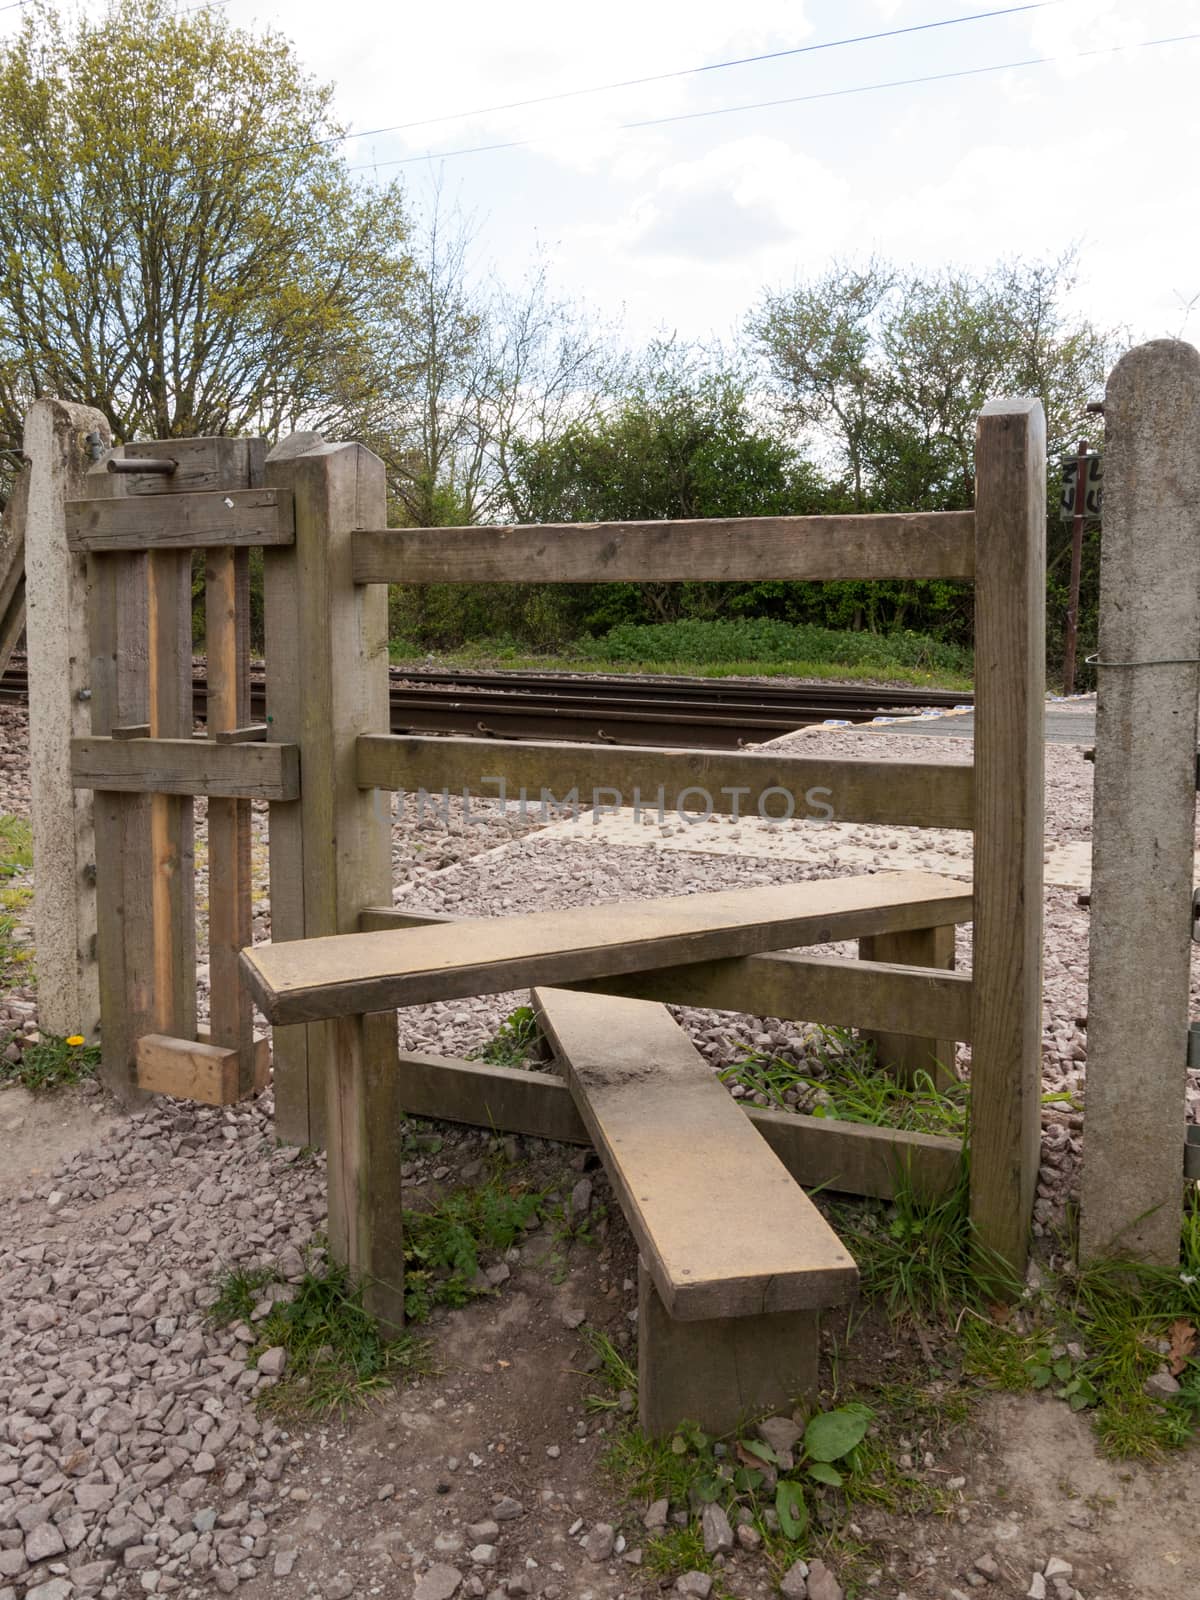 The Wooden Crossing Over A Railway Track, the Planks To Cross Over the Path with Gate and Fence in Spring